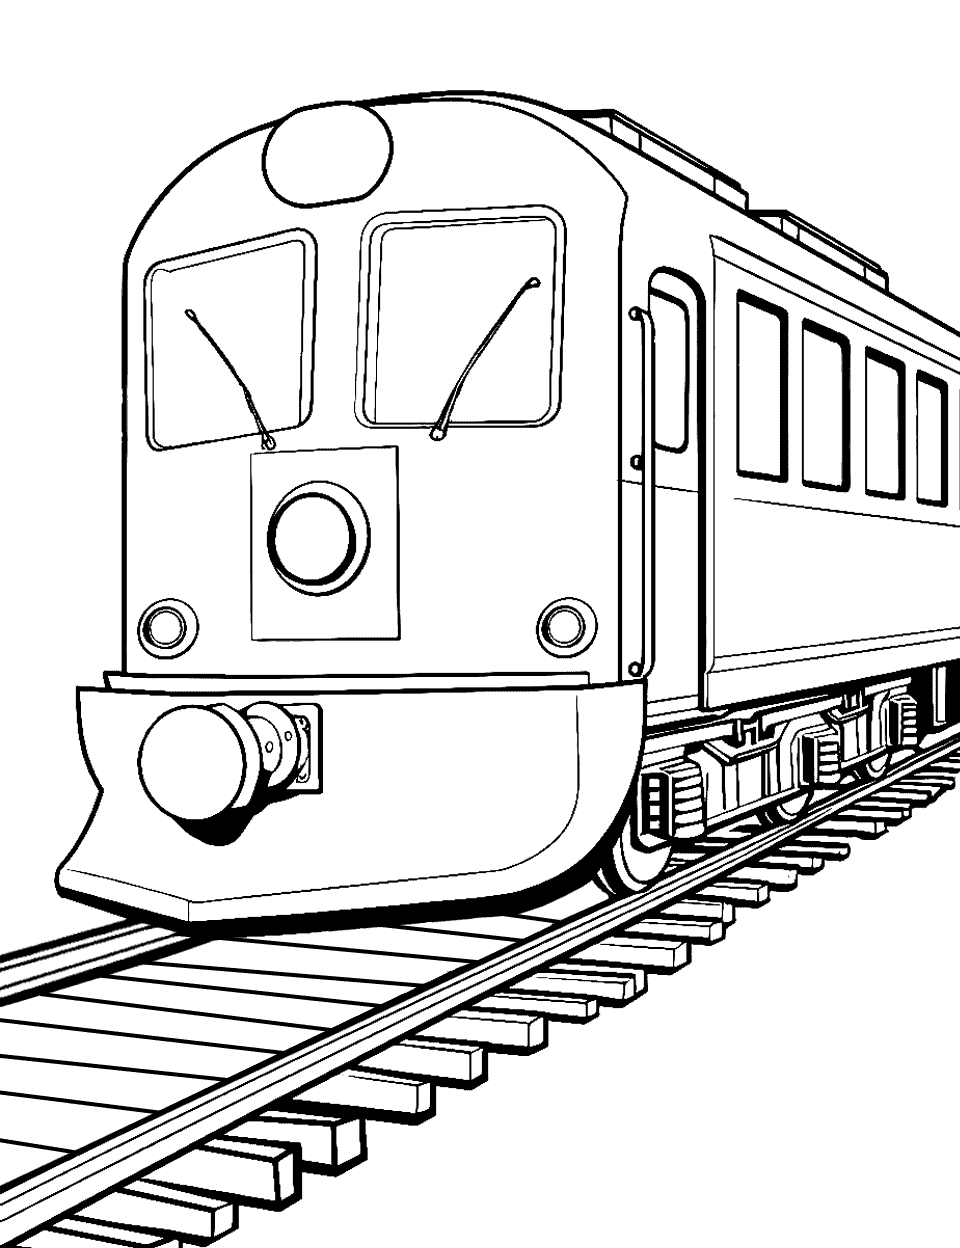 Eco-Friendly Solar Train Coloring Page - A modern train powered by solar power.